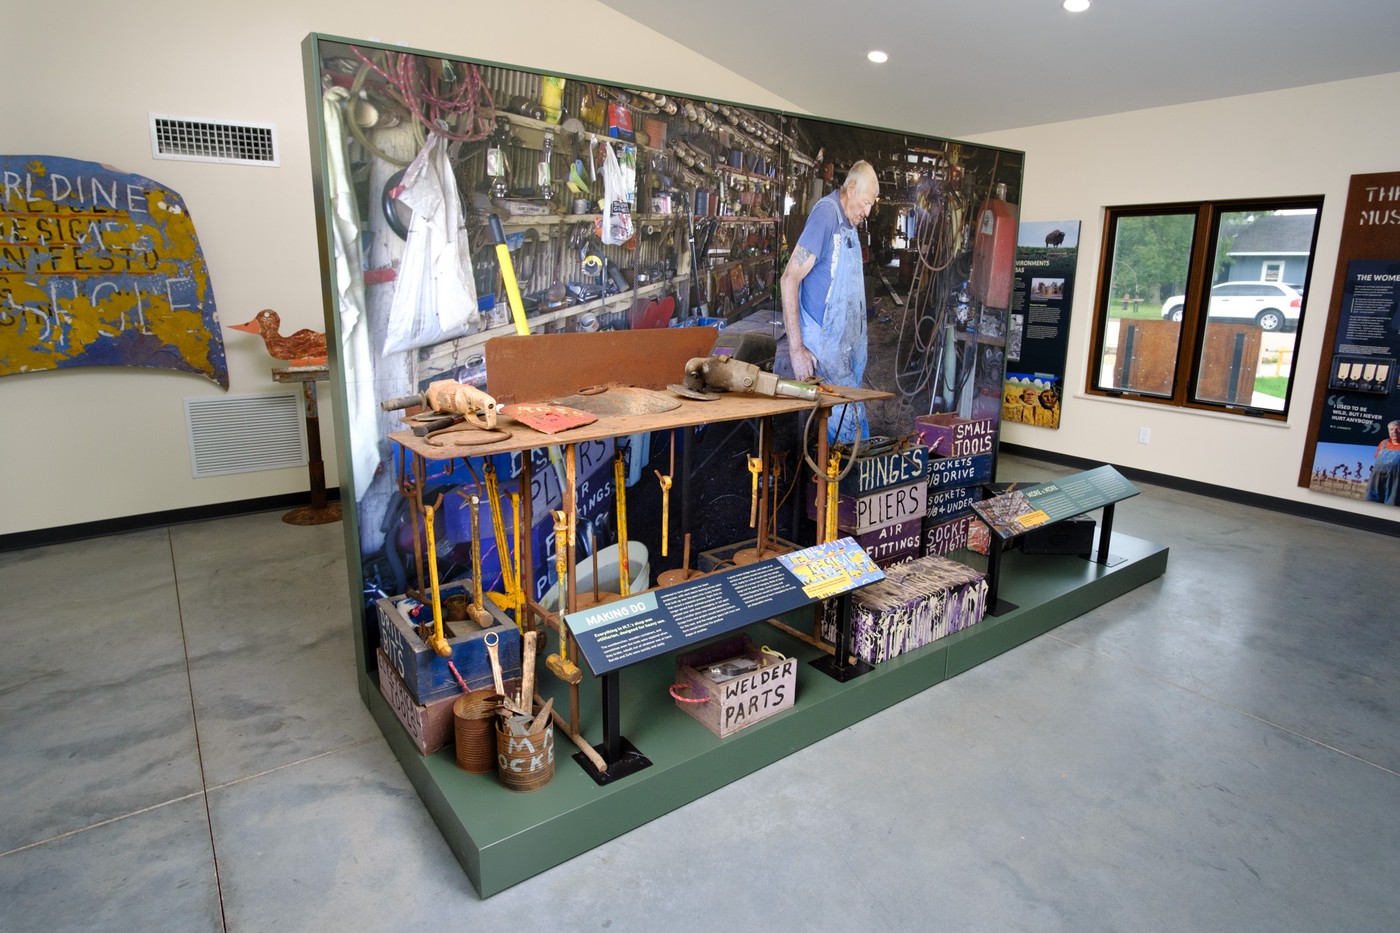 Second side of center island shows another large photo of Liggett's studio with him in it. In front of the photo are tools, a metal workbench, and storage crates painted blue and purple and hand labelled.